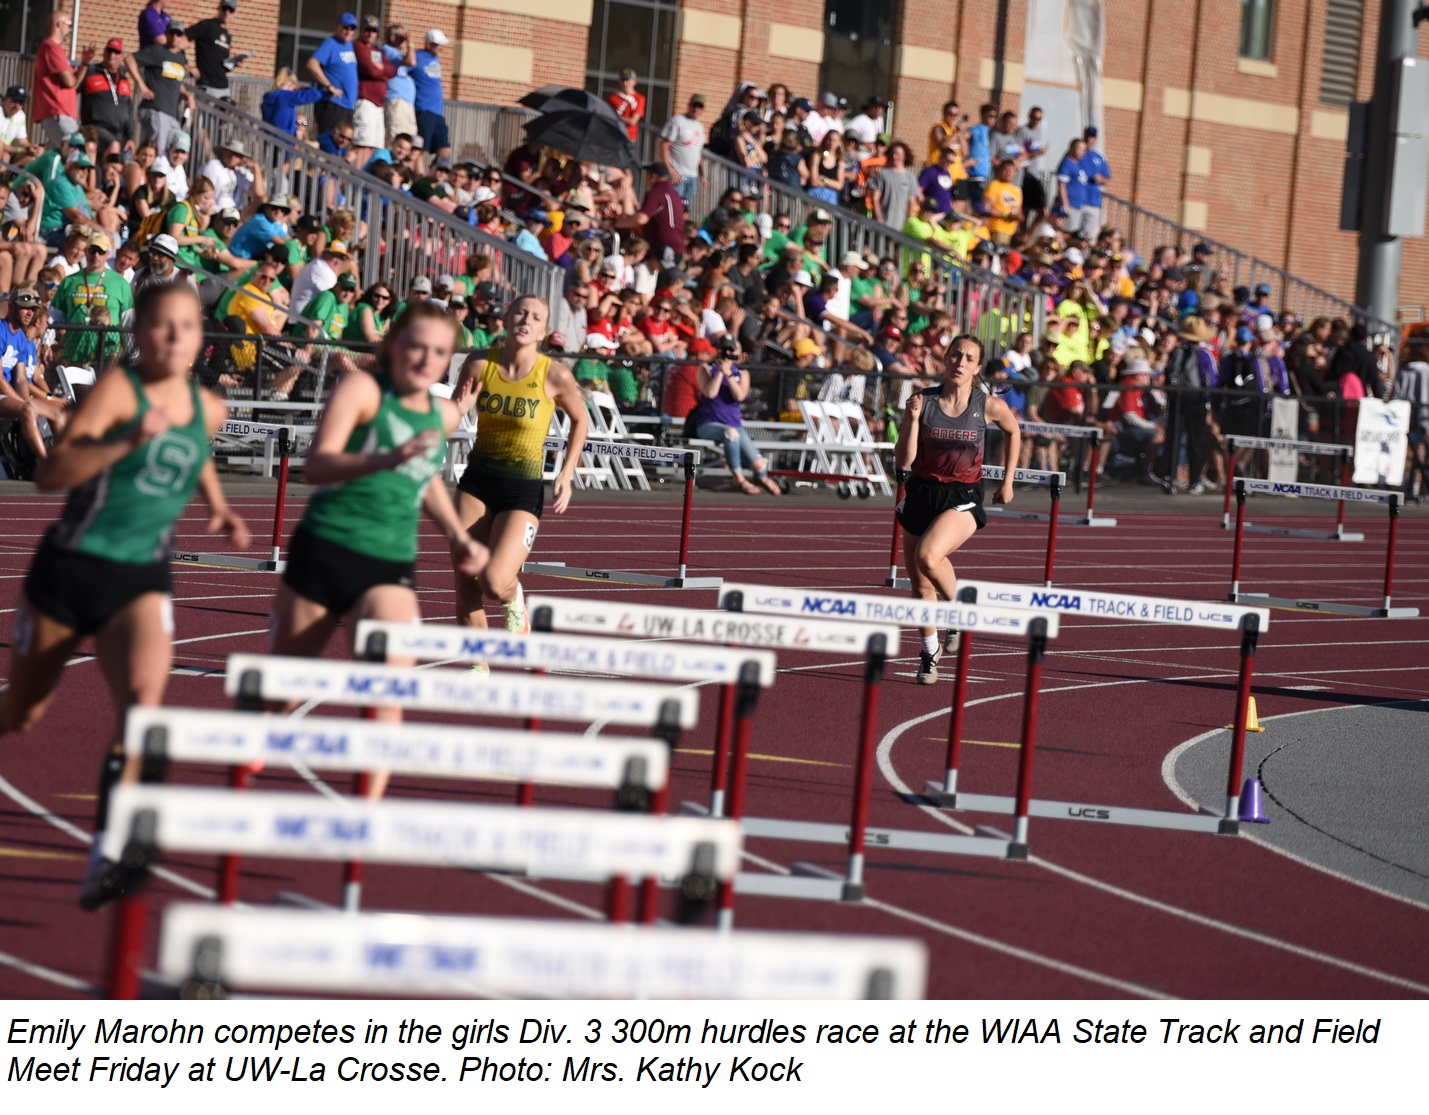 Emily Marohn competes in the 300m hurdles Friday at the State Track and Field Meet.